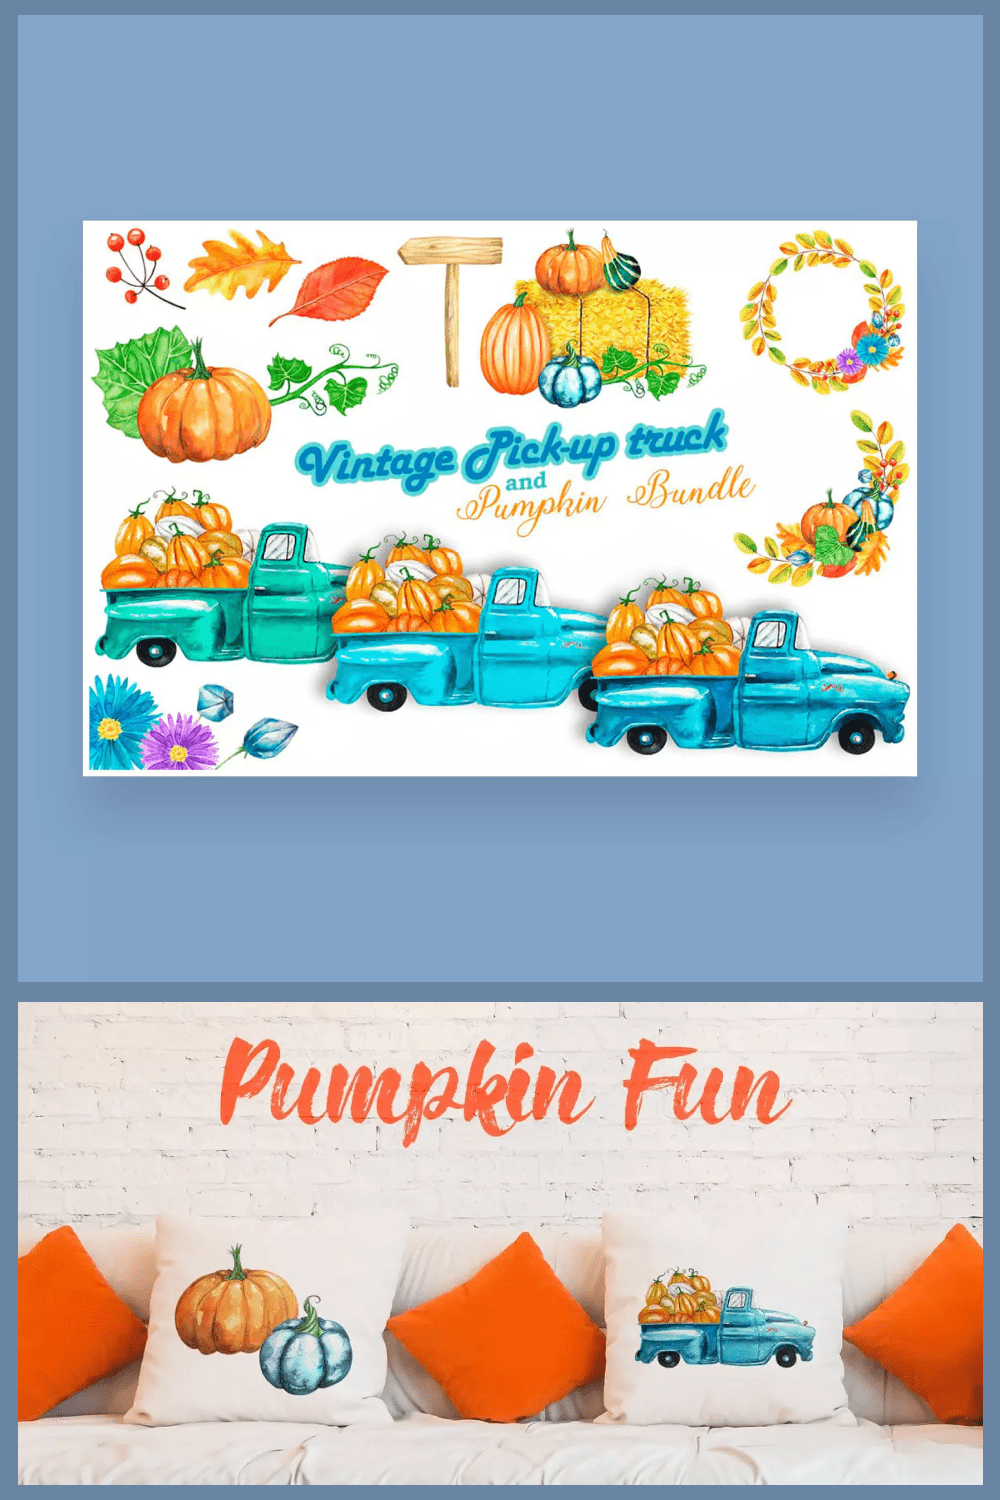 Collage of blue pickup trucks loaded with pumpkins.